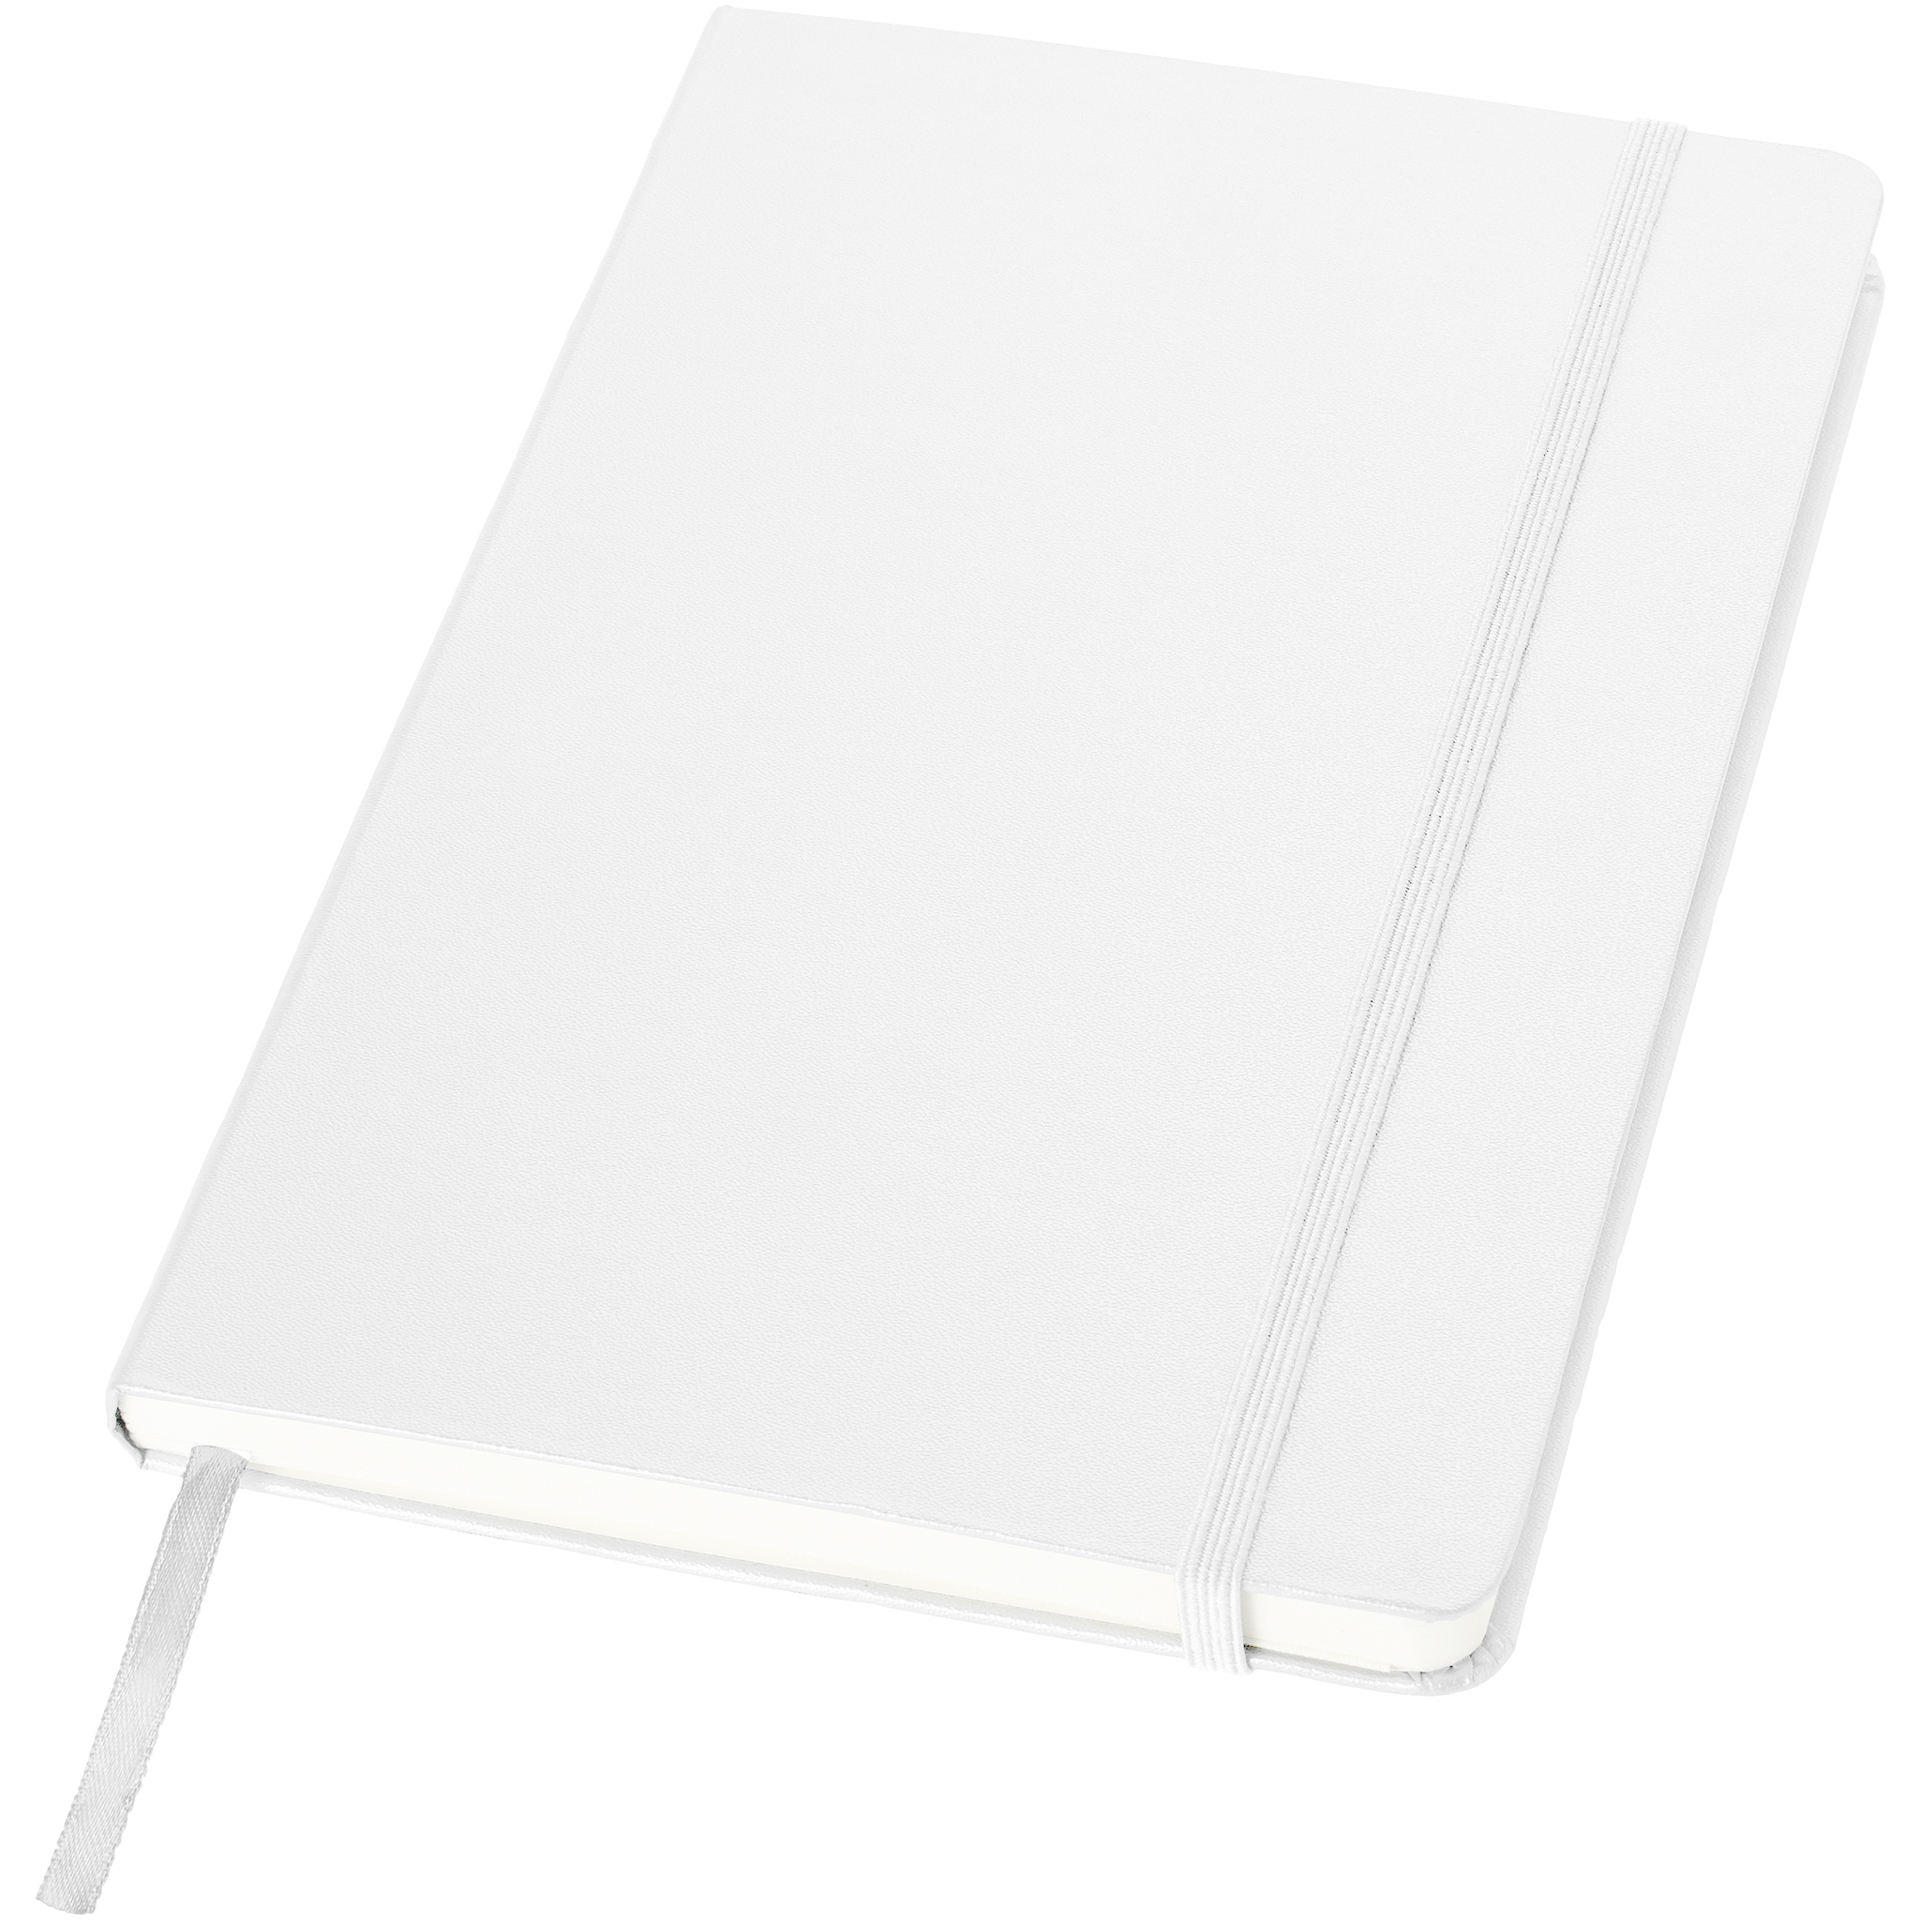 A5 hard cover notebook in white with white elastic closure and ribbon